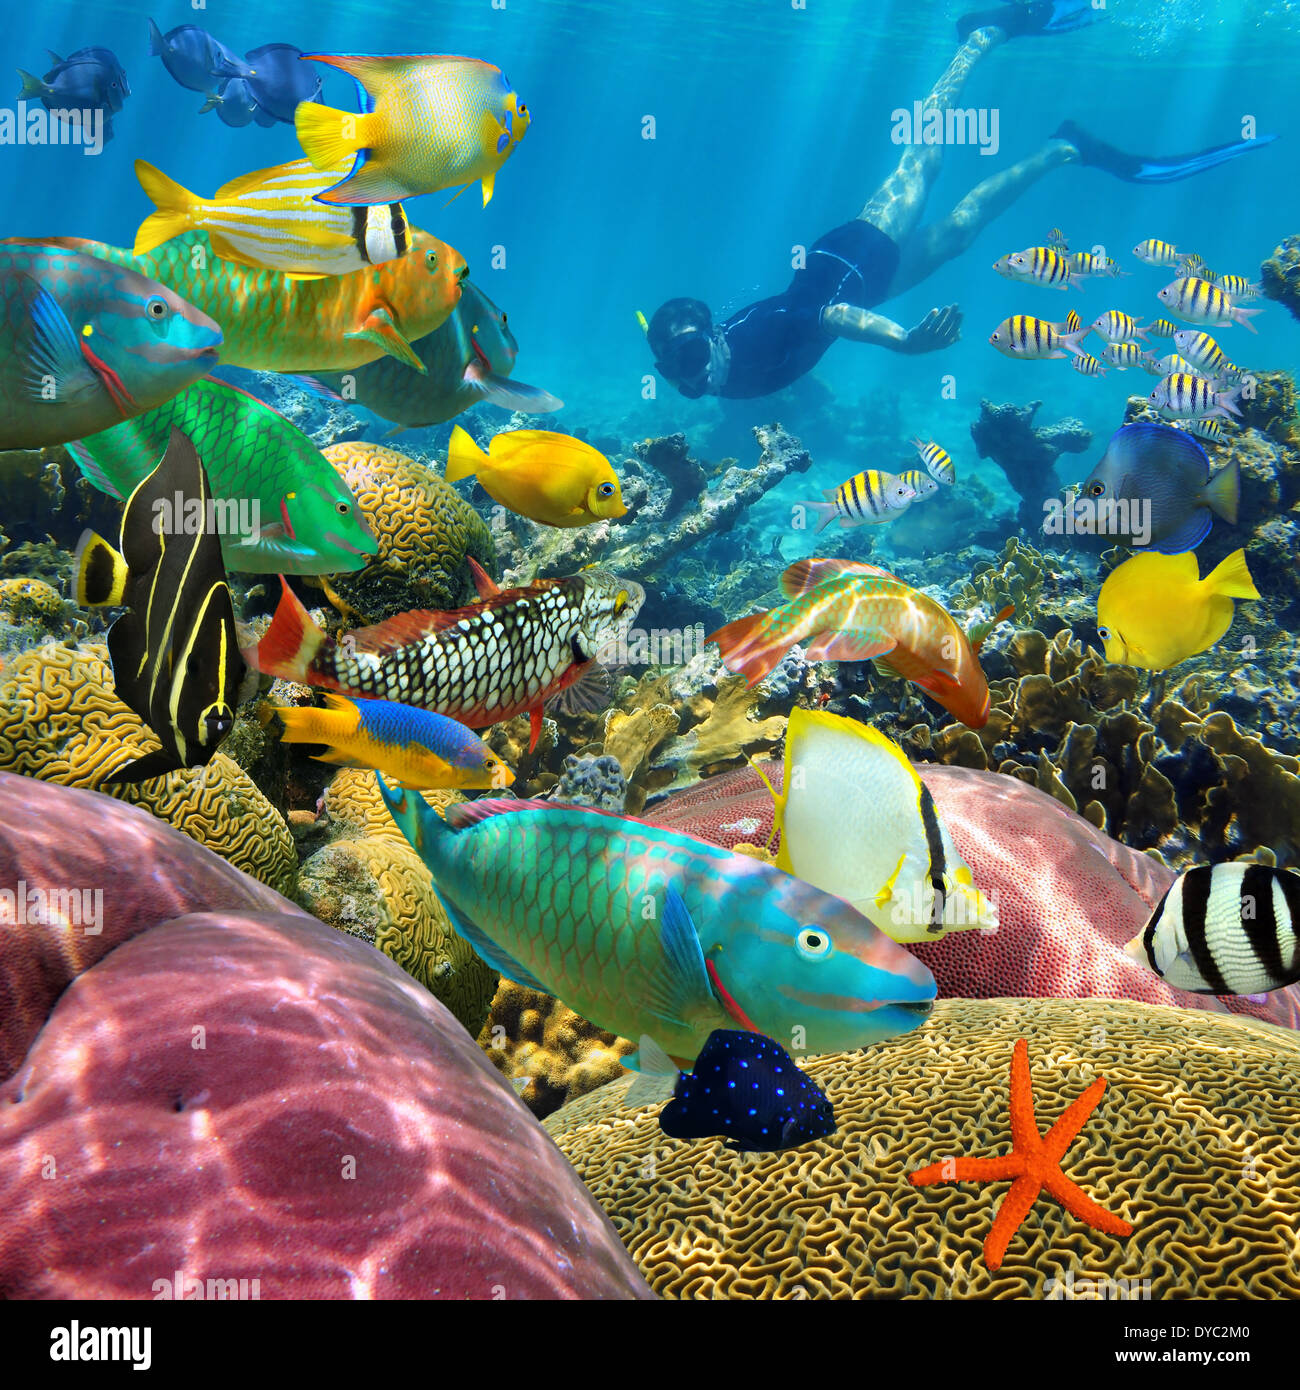 Man underwater swims in a colorful coral reef with tropical fish Stock Photo